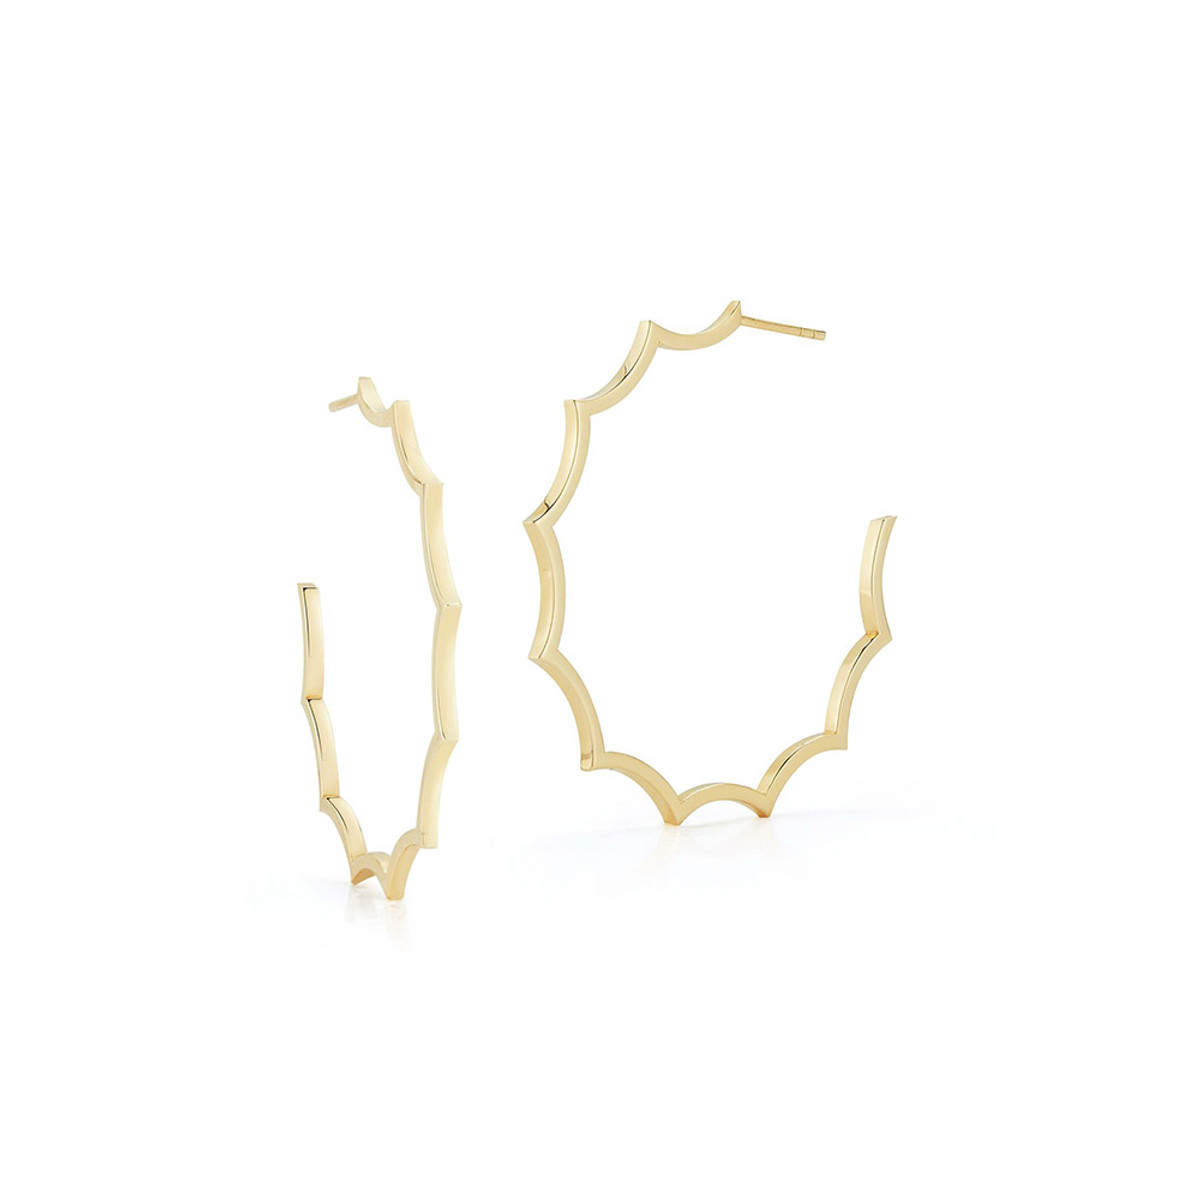 Walters Faith Clive 18K Yellow Gold Scalloped Hoop Earrings-56178